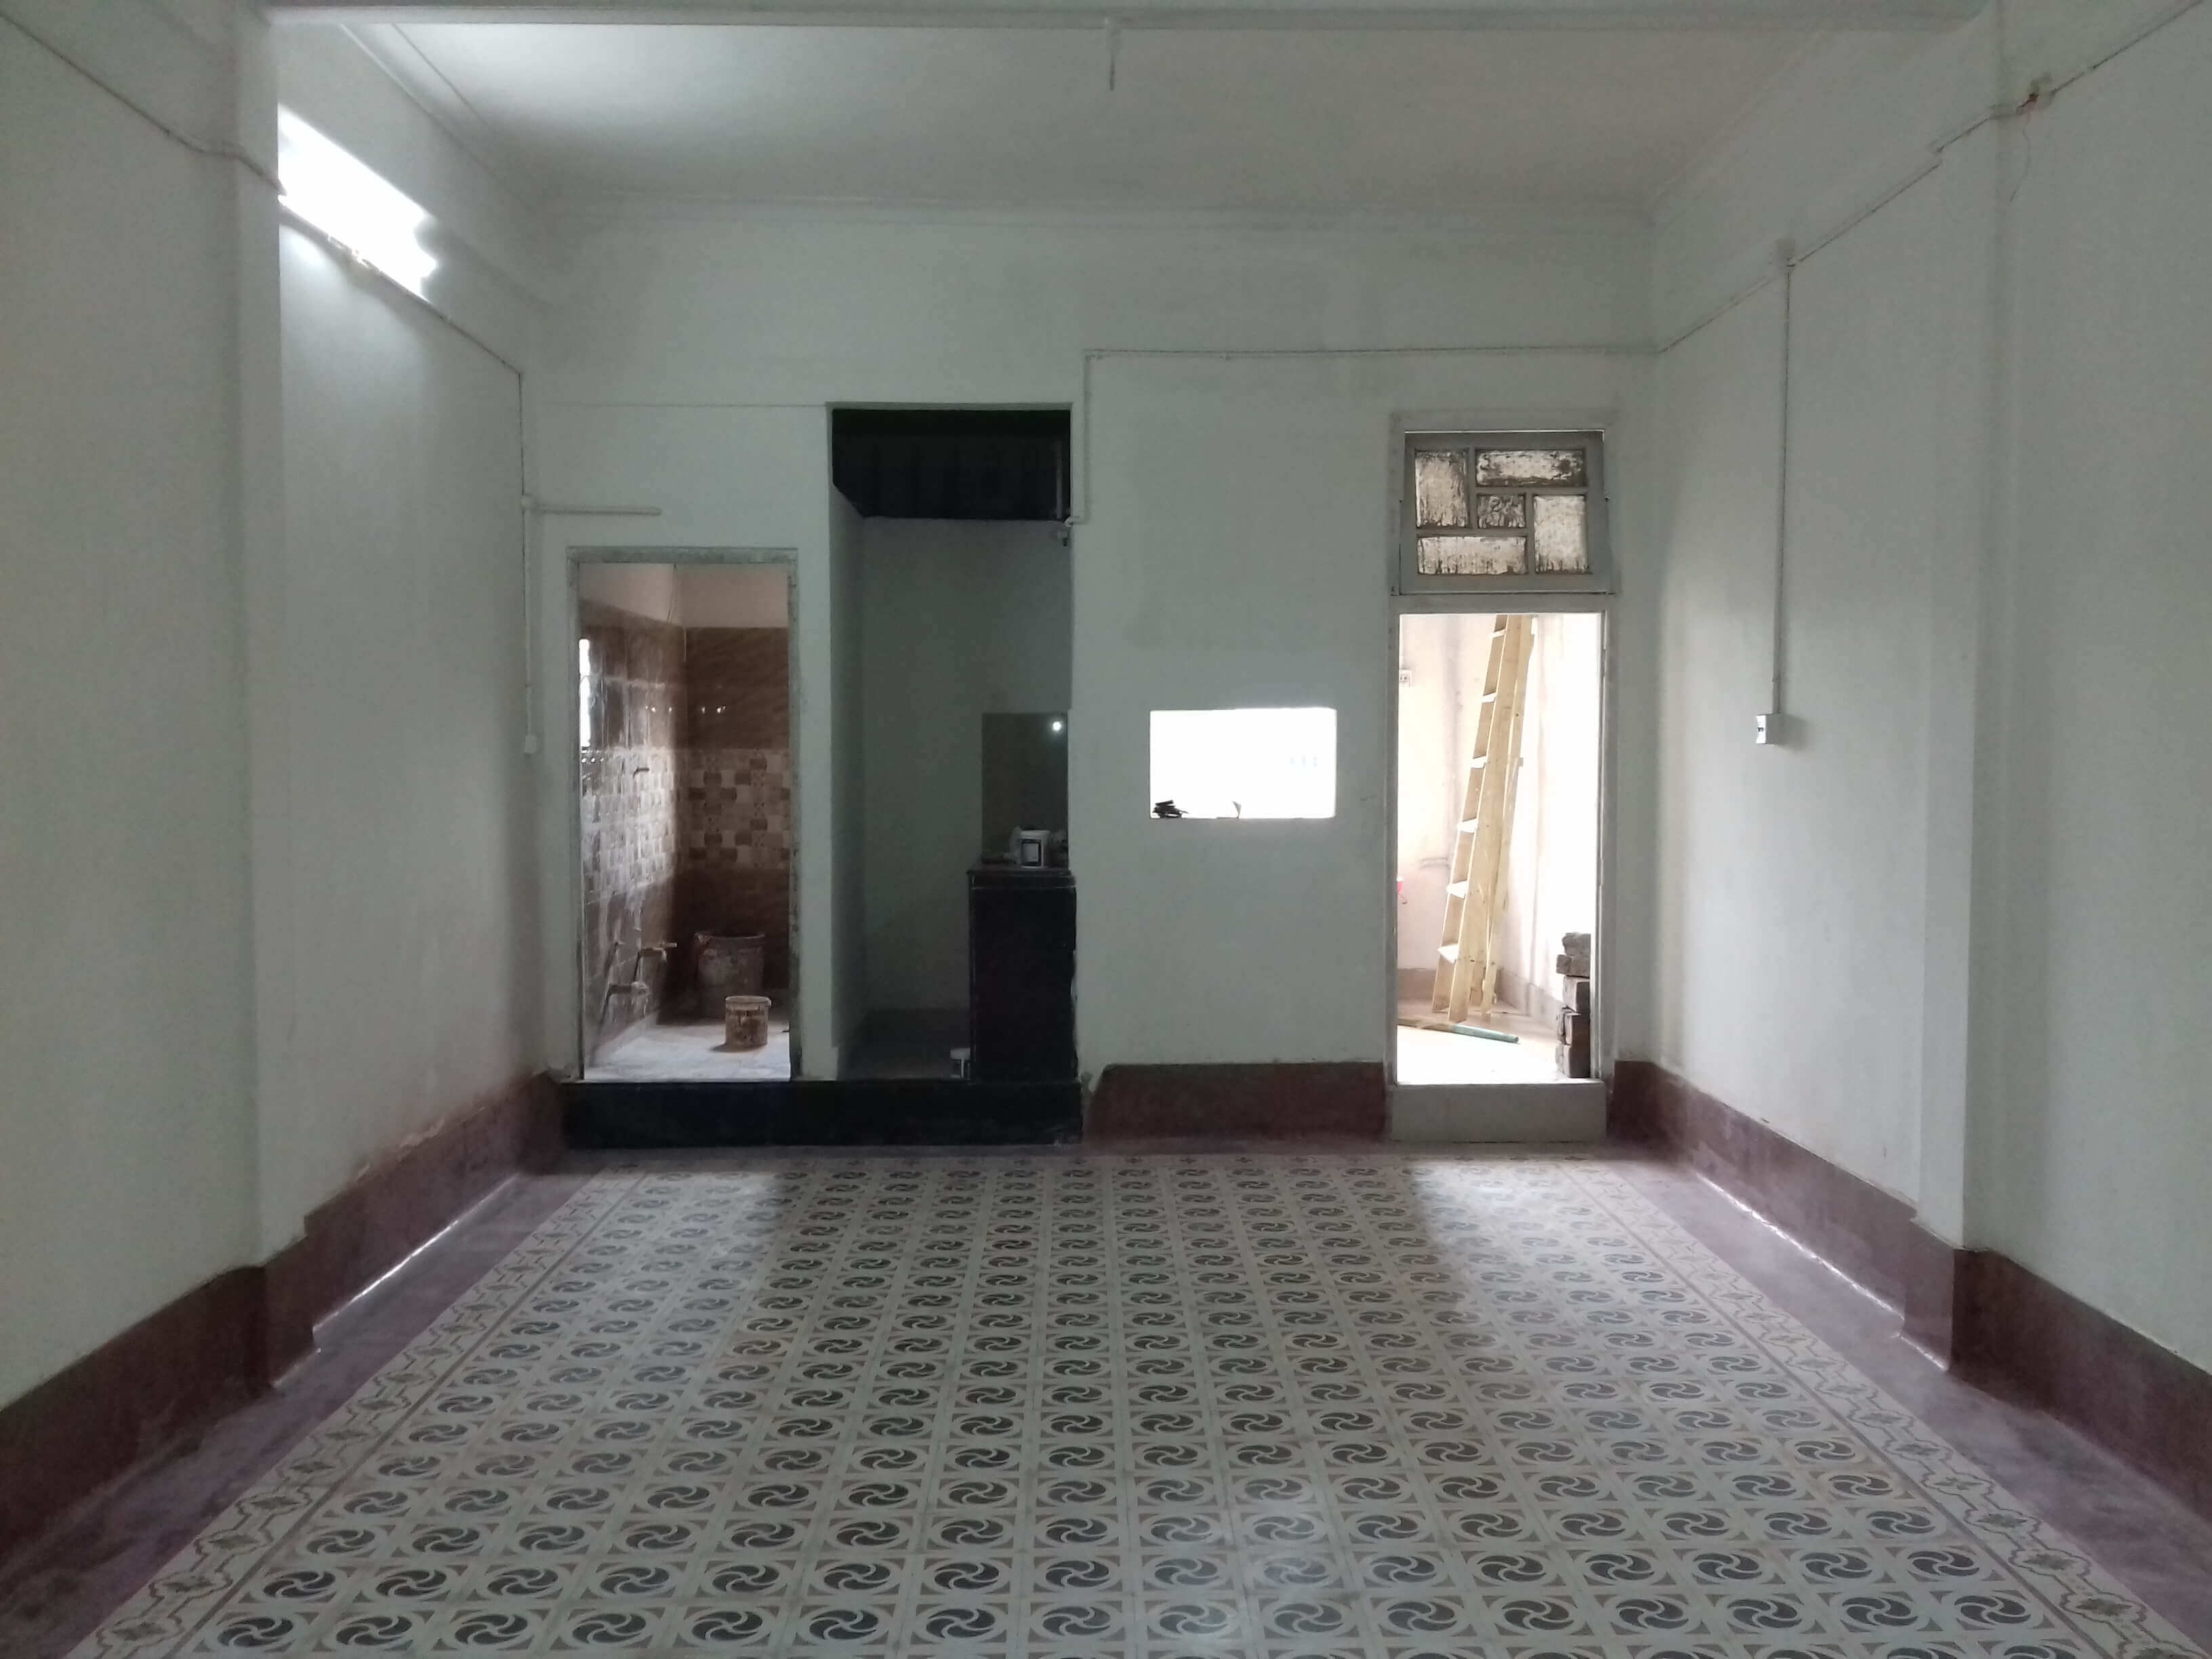 Office For Rent In AJC Bose Road Kolkata (Id: 10977)